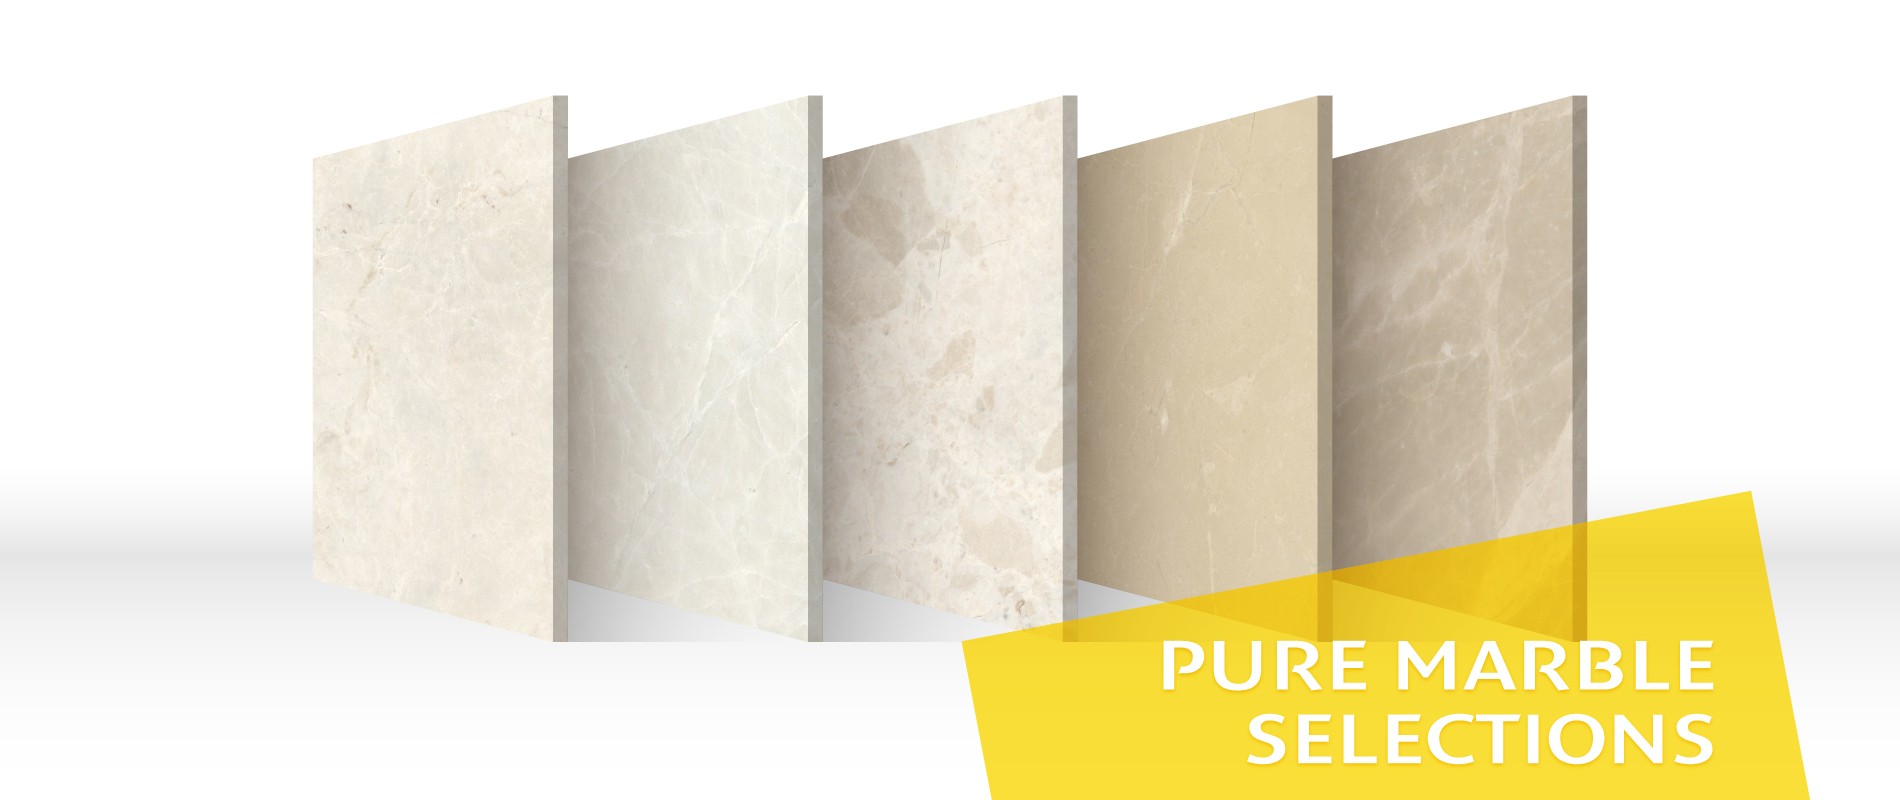 Pure Marble Selections